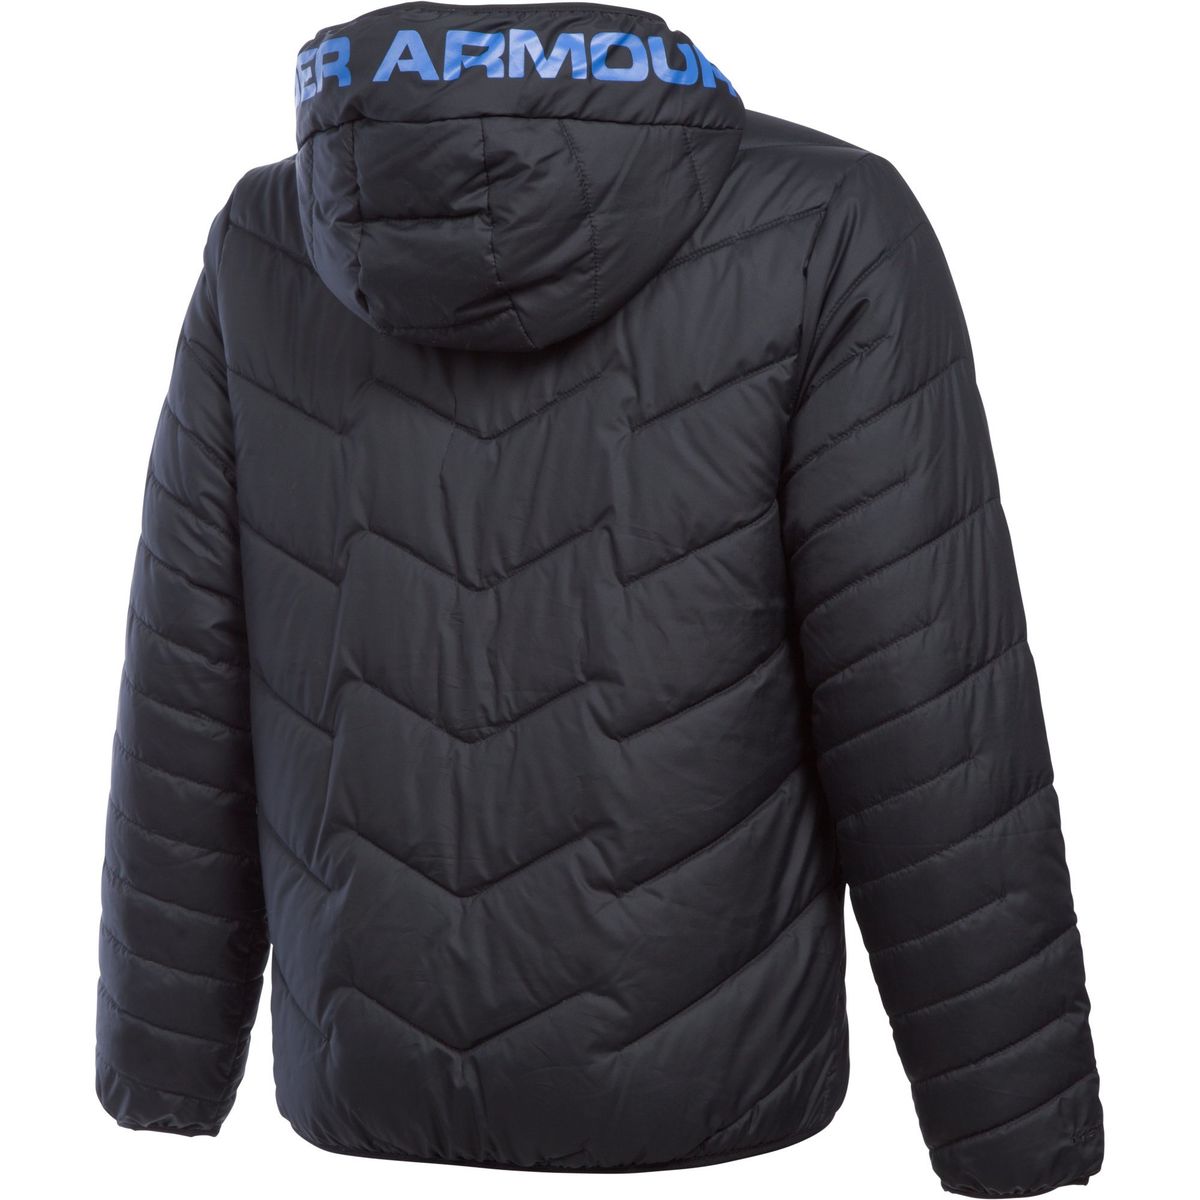 Under Armour Coldgear Reactor Hooded Insulated Jacket - Boys' - Kids